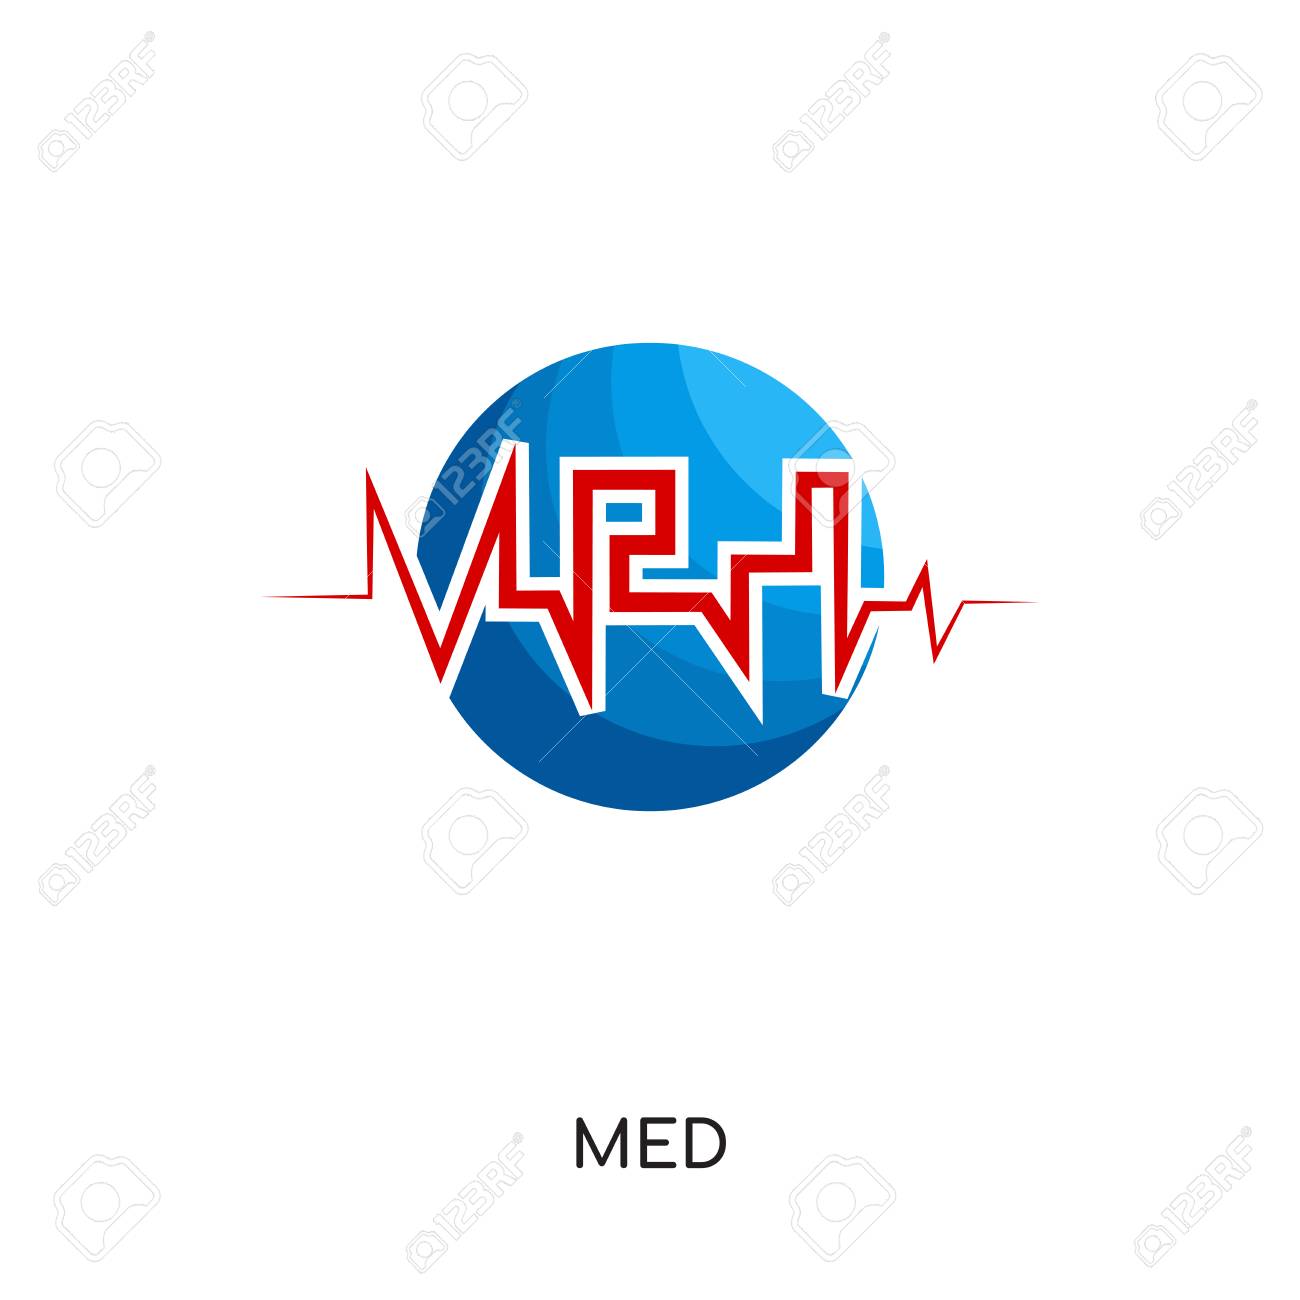 Med Logo Isolated On White Background For Your Web Mobile And